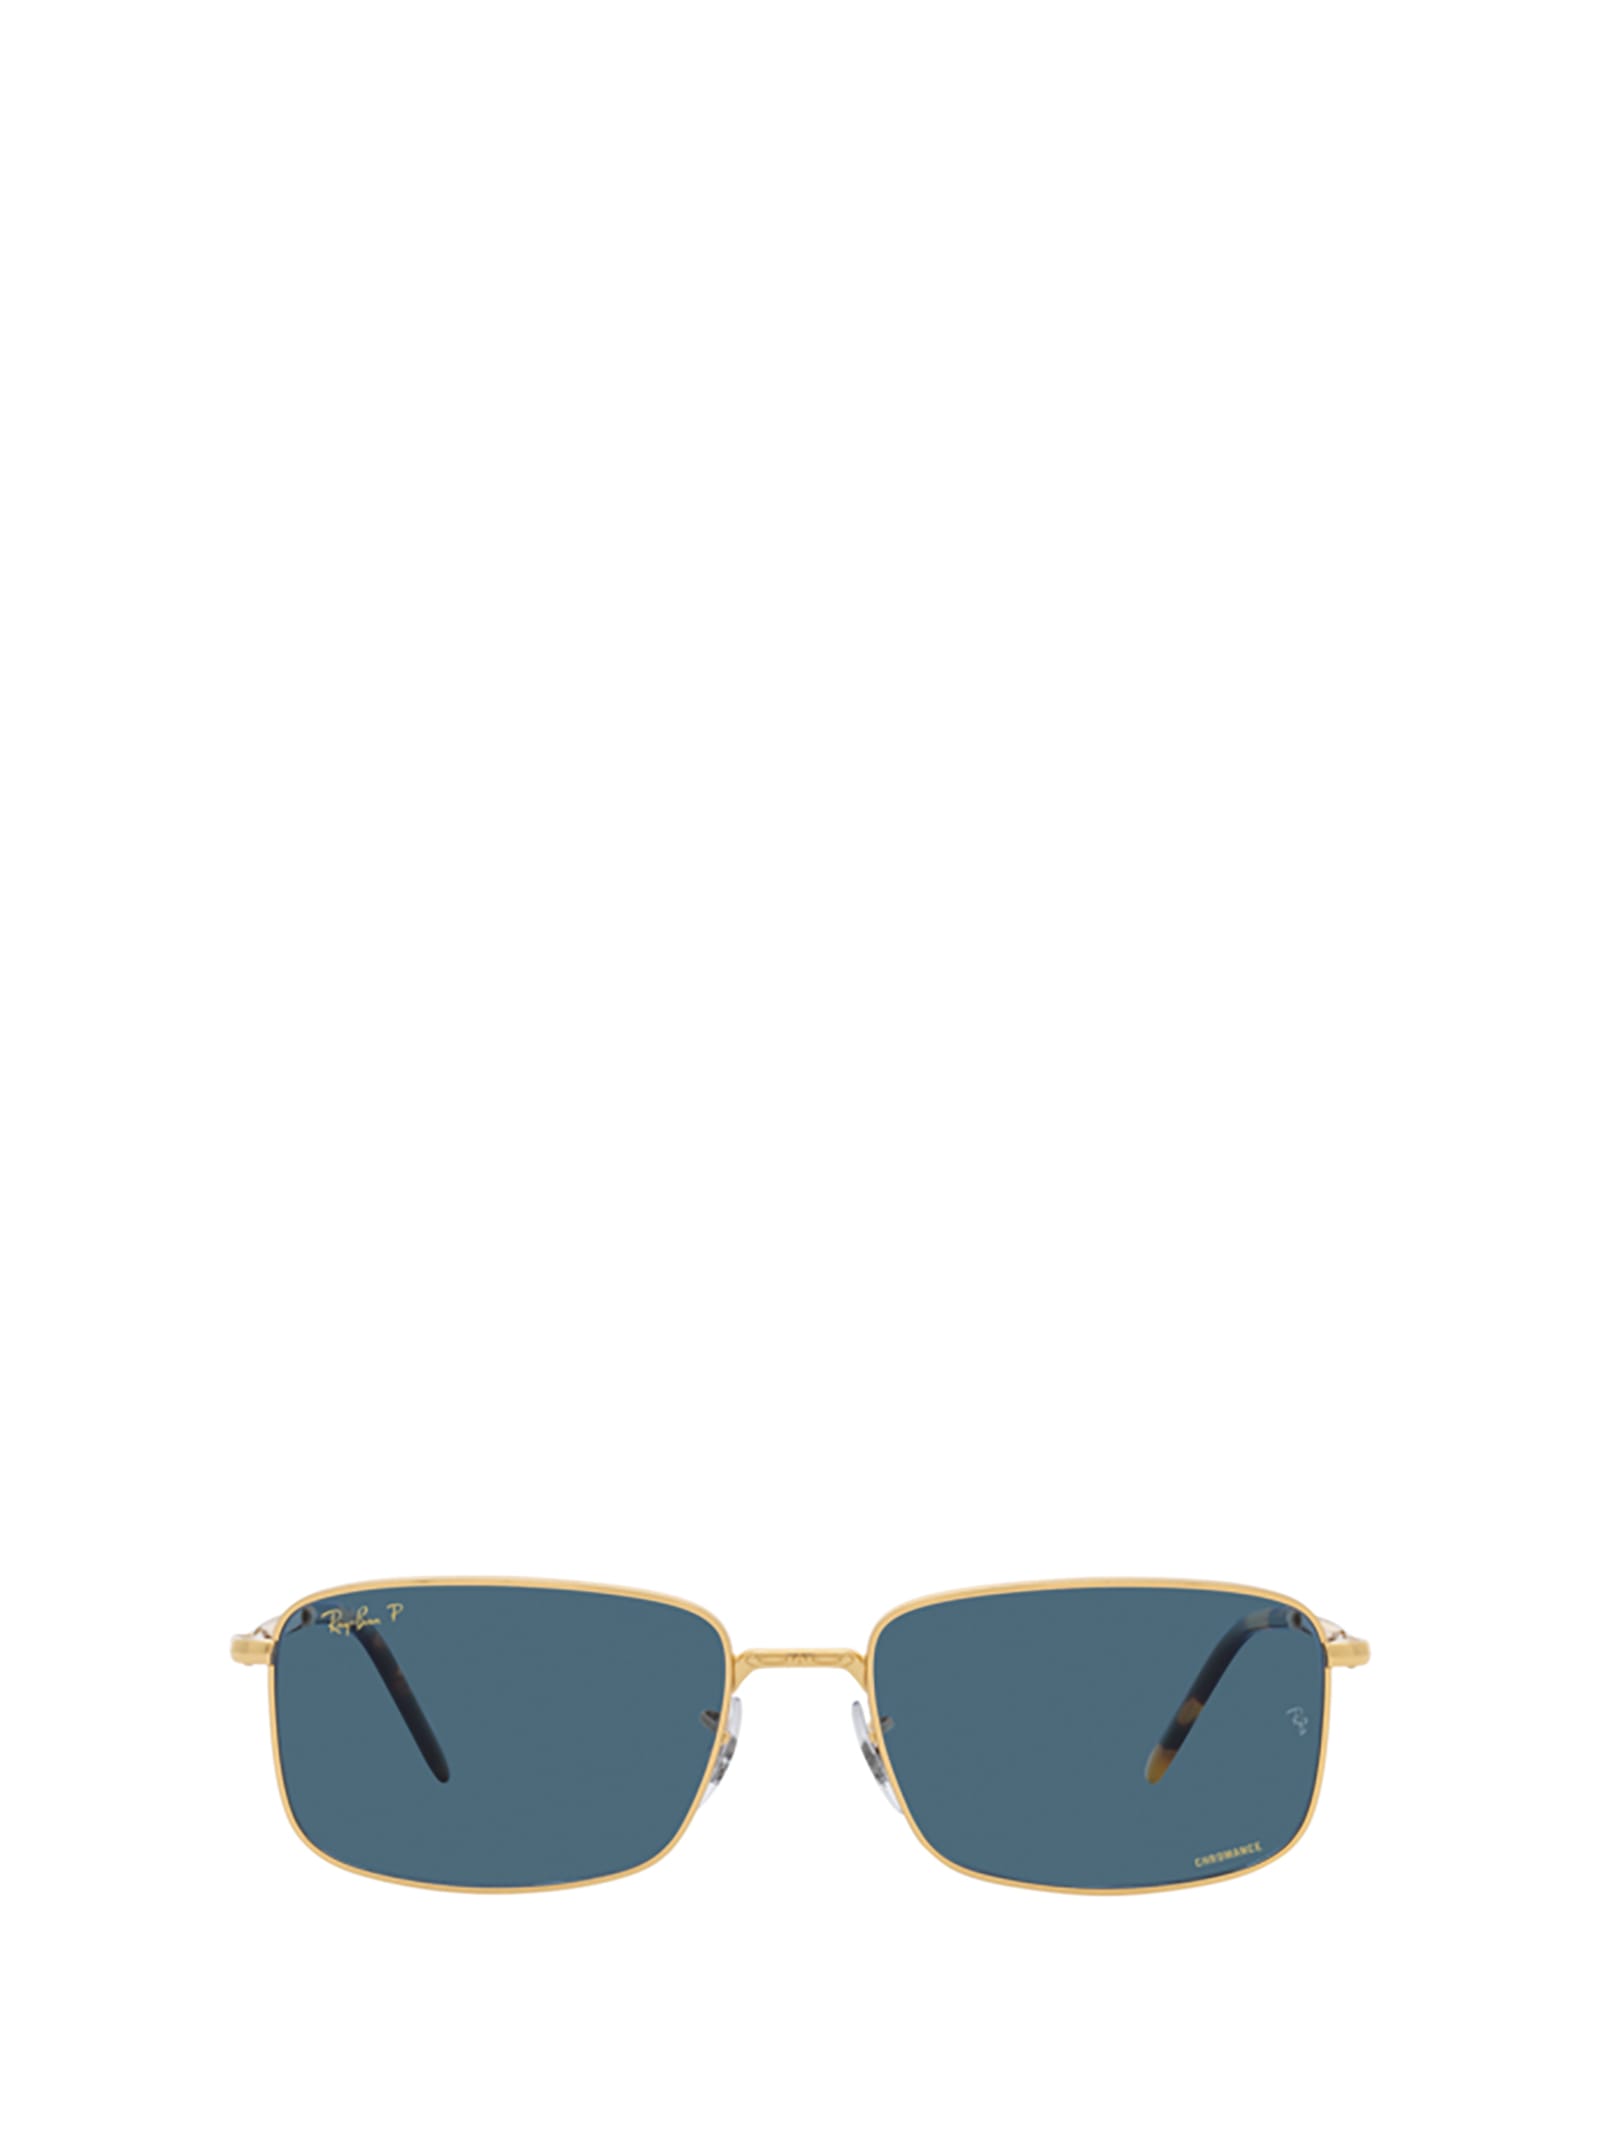 RAY BAN RB3717 GOLD SUNGLASSES